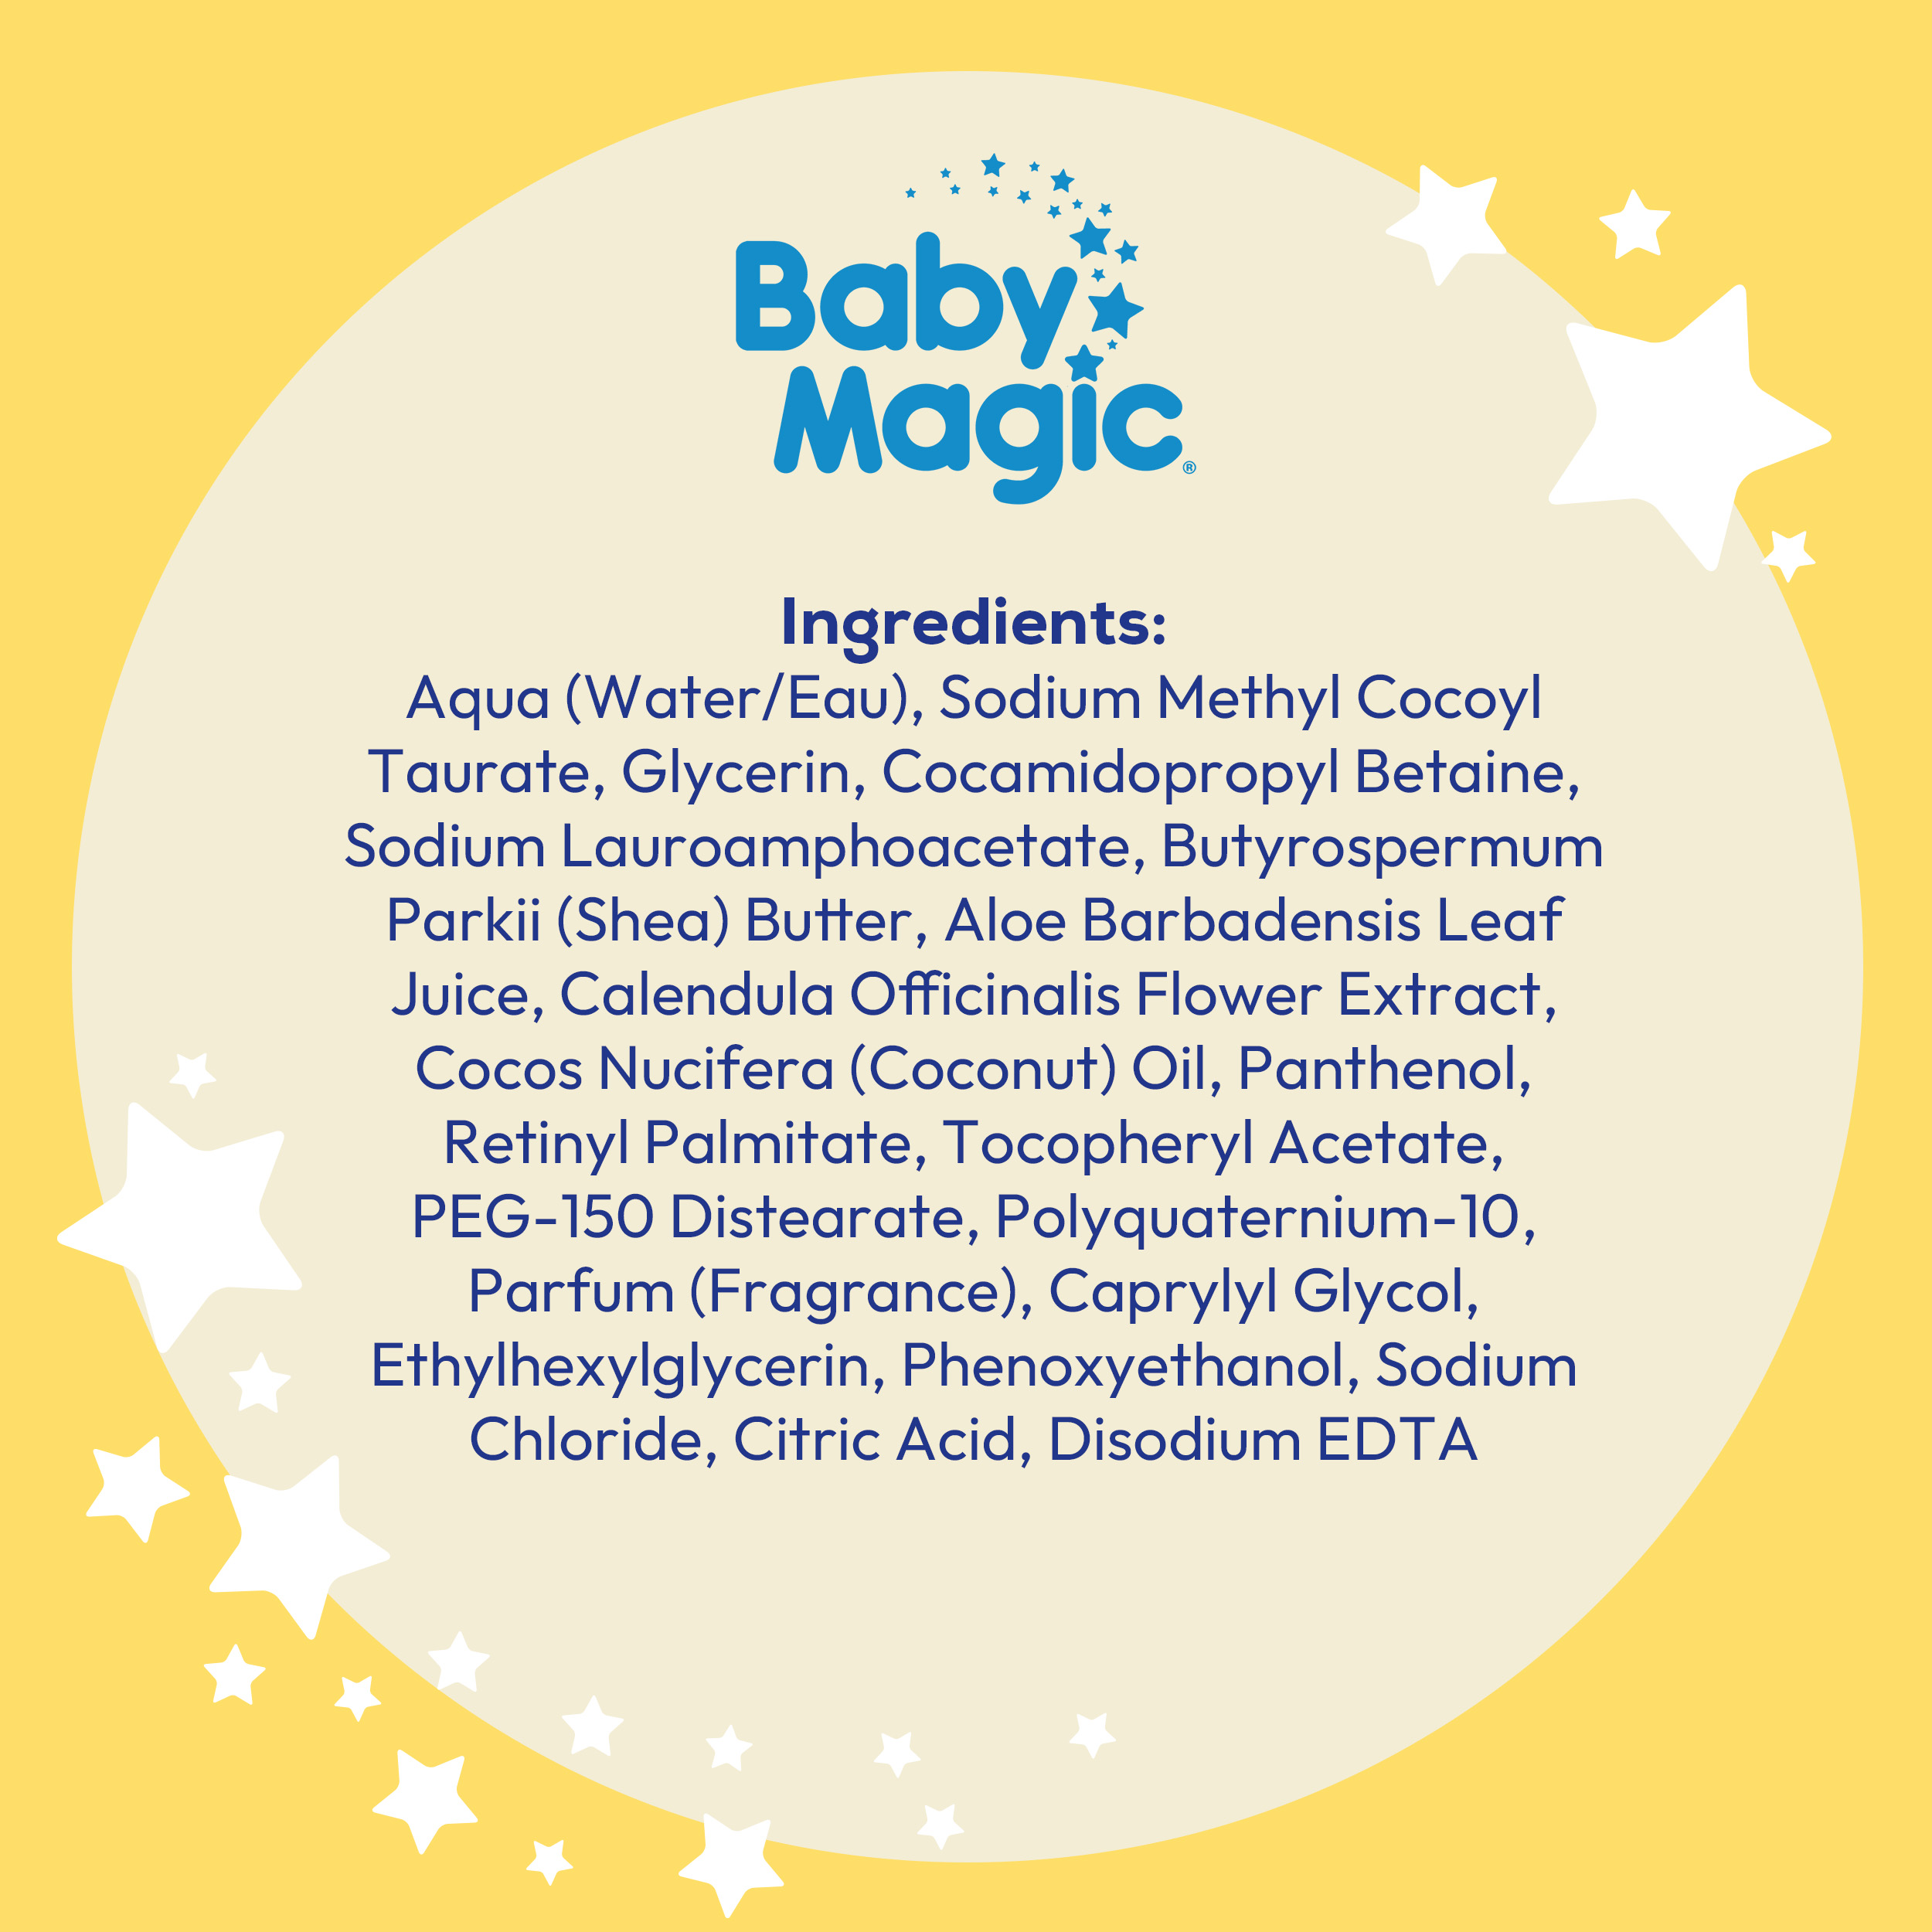 Baby Magic Tear-Free Gentle Hair and Body Wash, Soft Powder Scent, Hypoallergenic, 30 oz - image 3 of 7